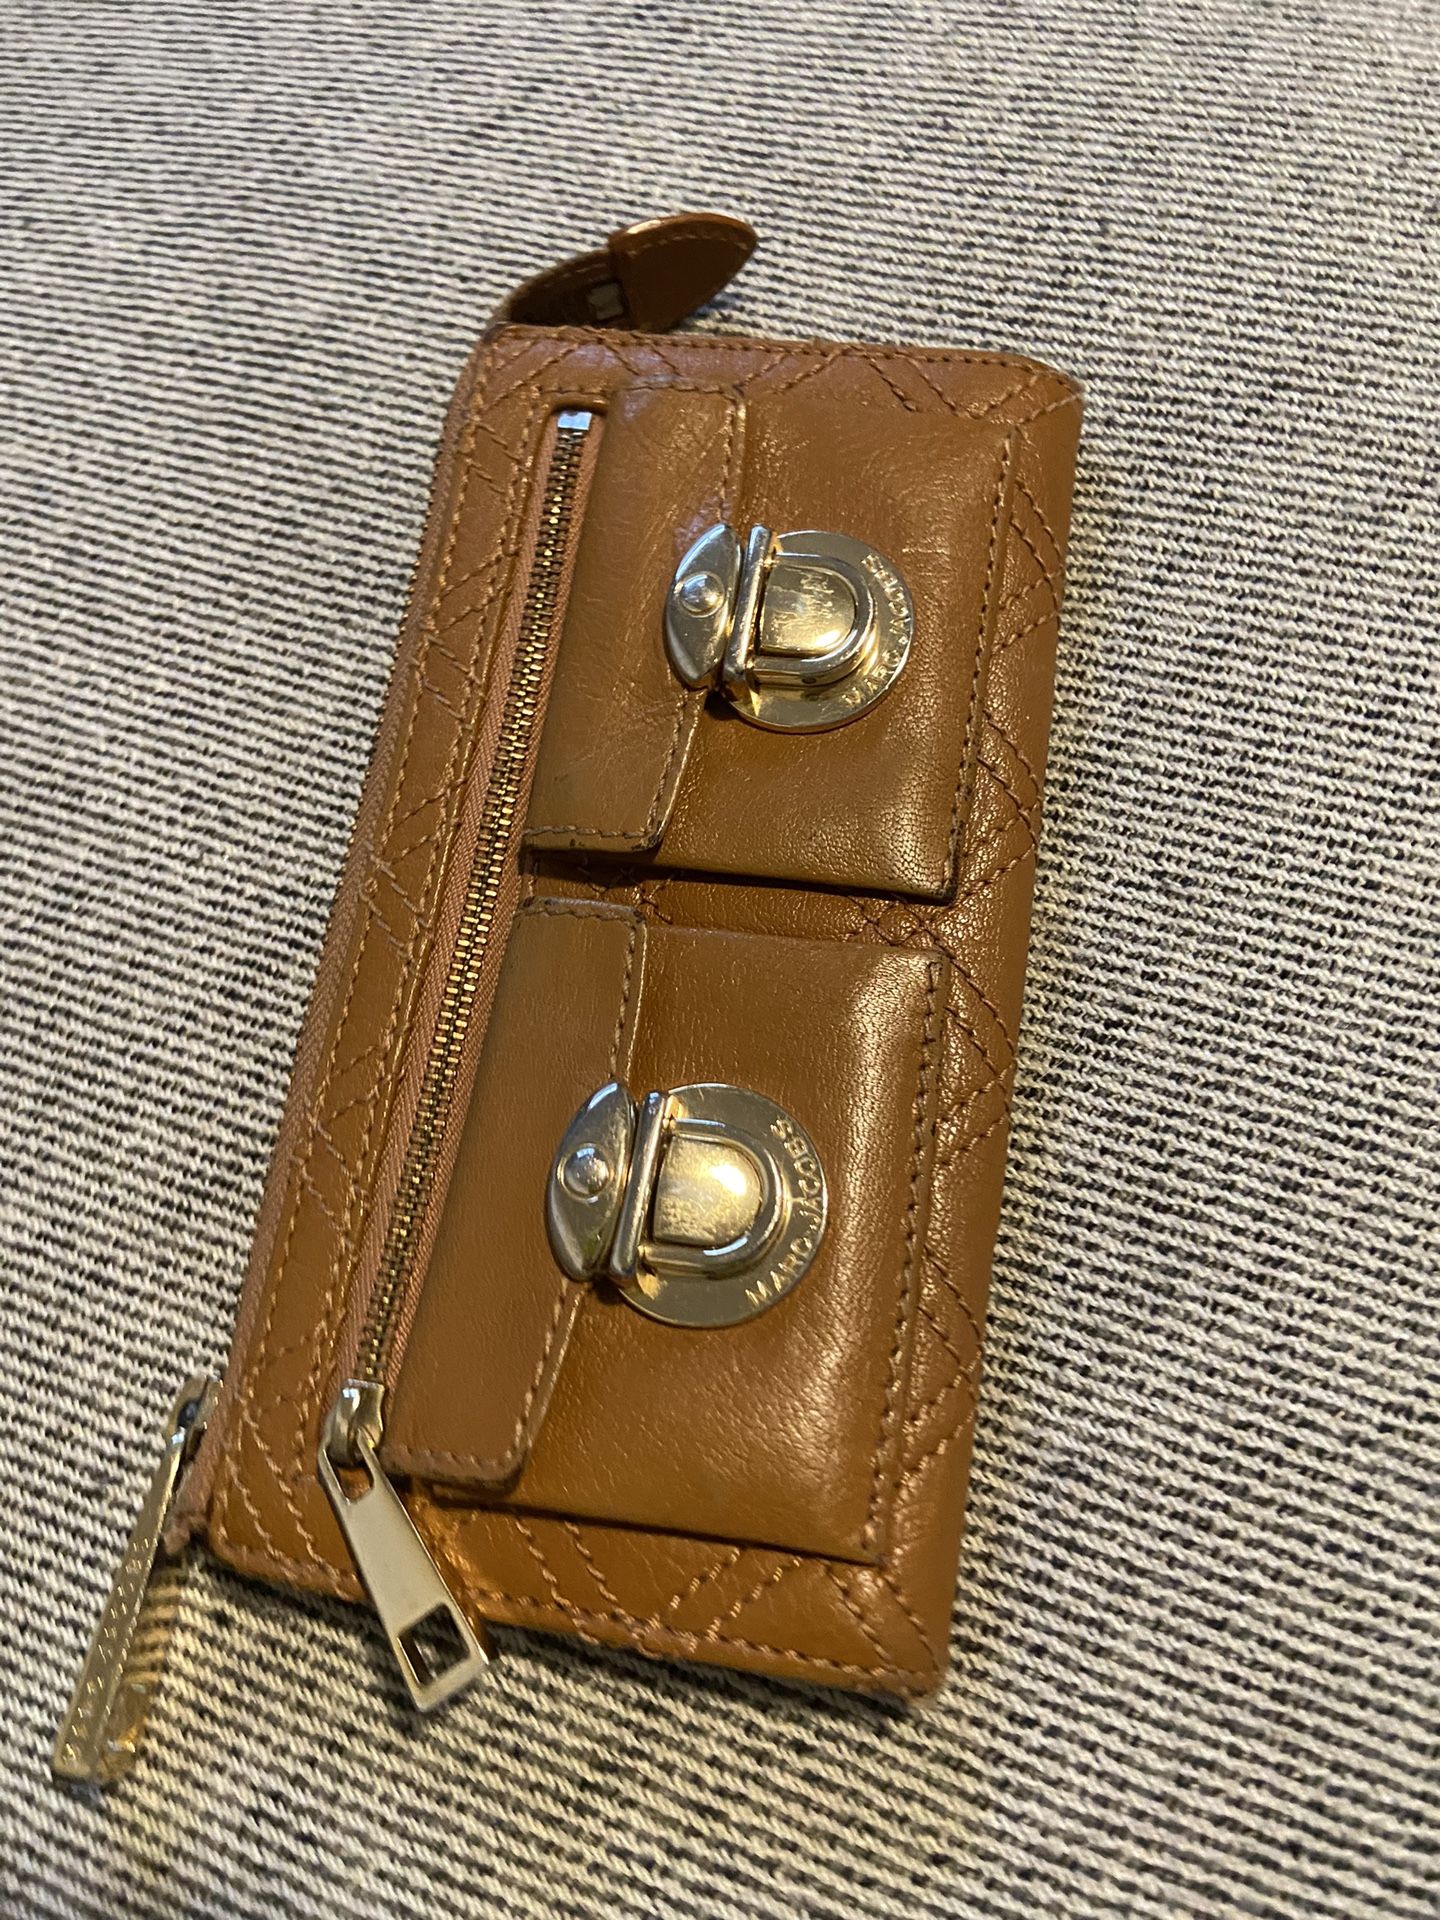 Marc Jacobs Tan Leather Wallet 